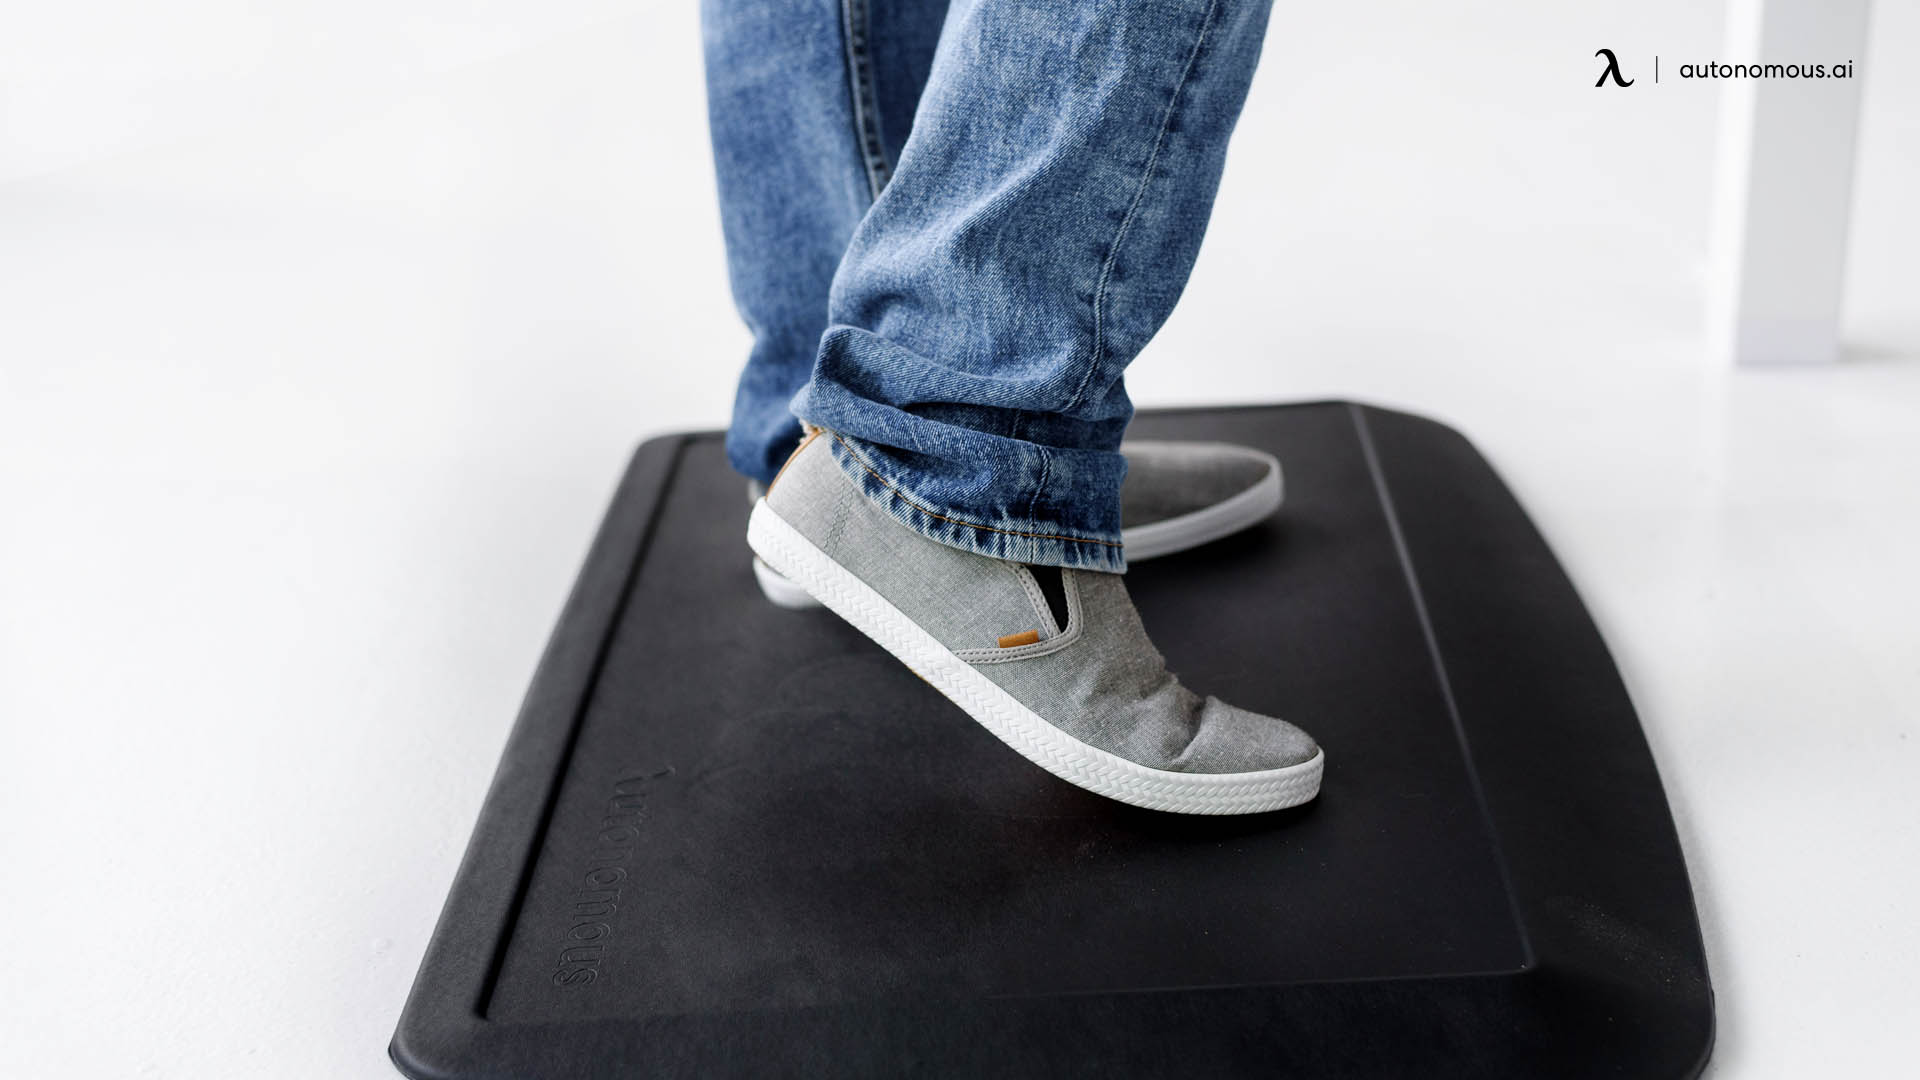 15 Best Standing Desk Mat Options in 2022 (Experts Choice)